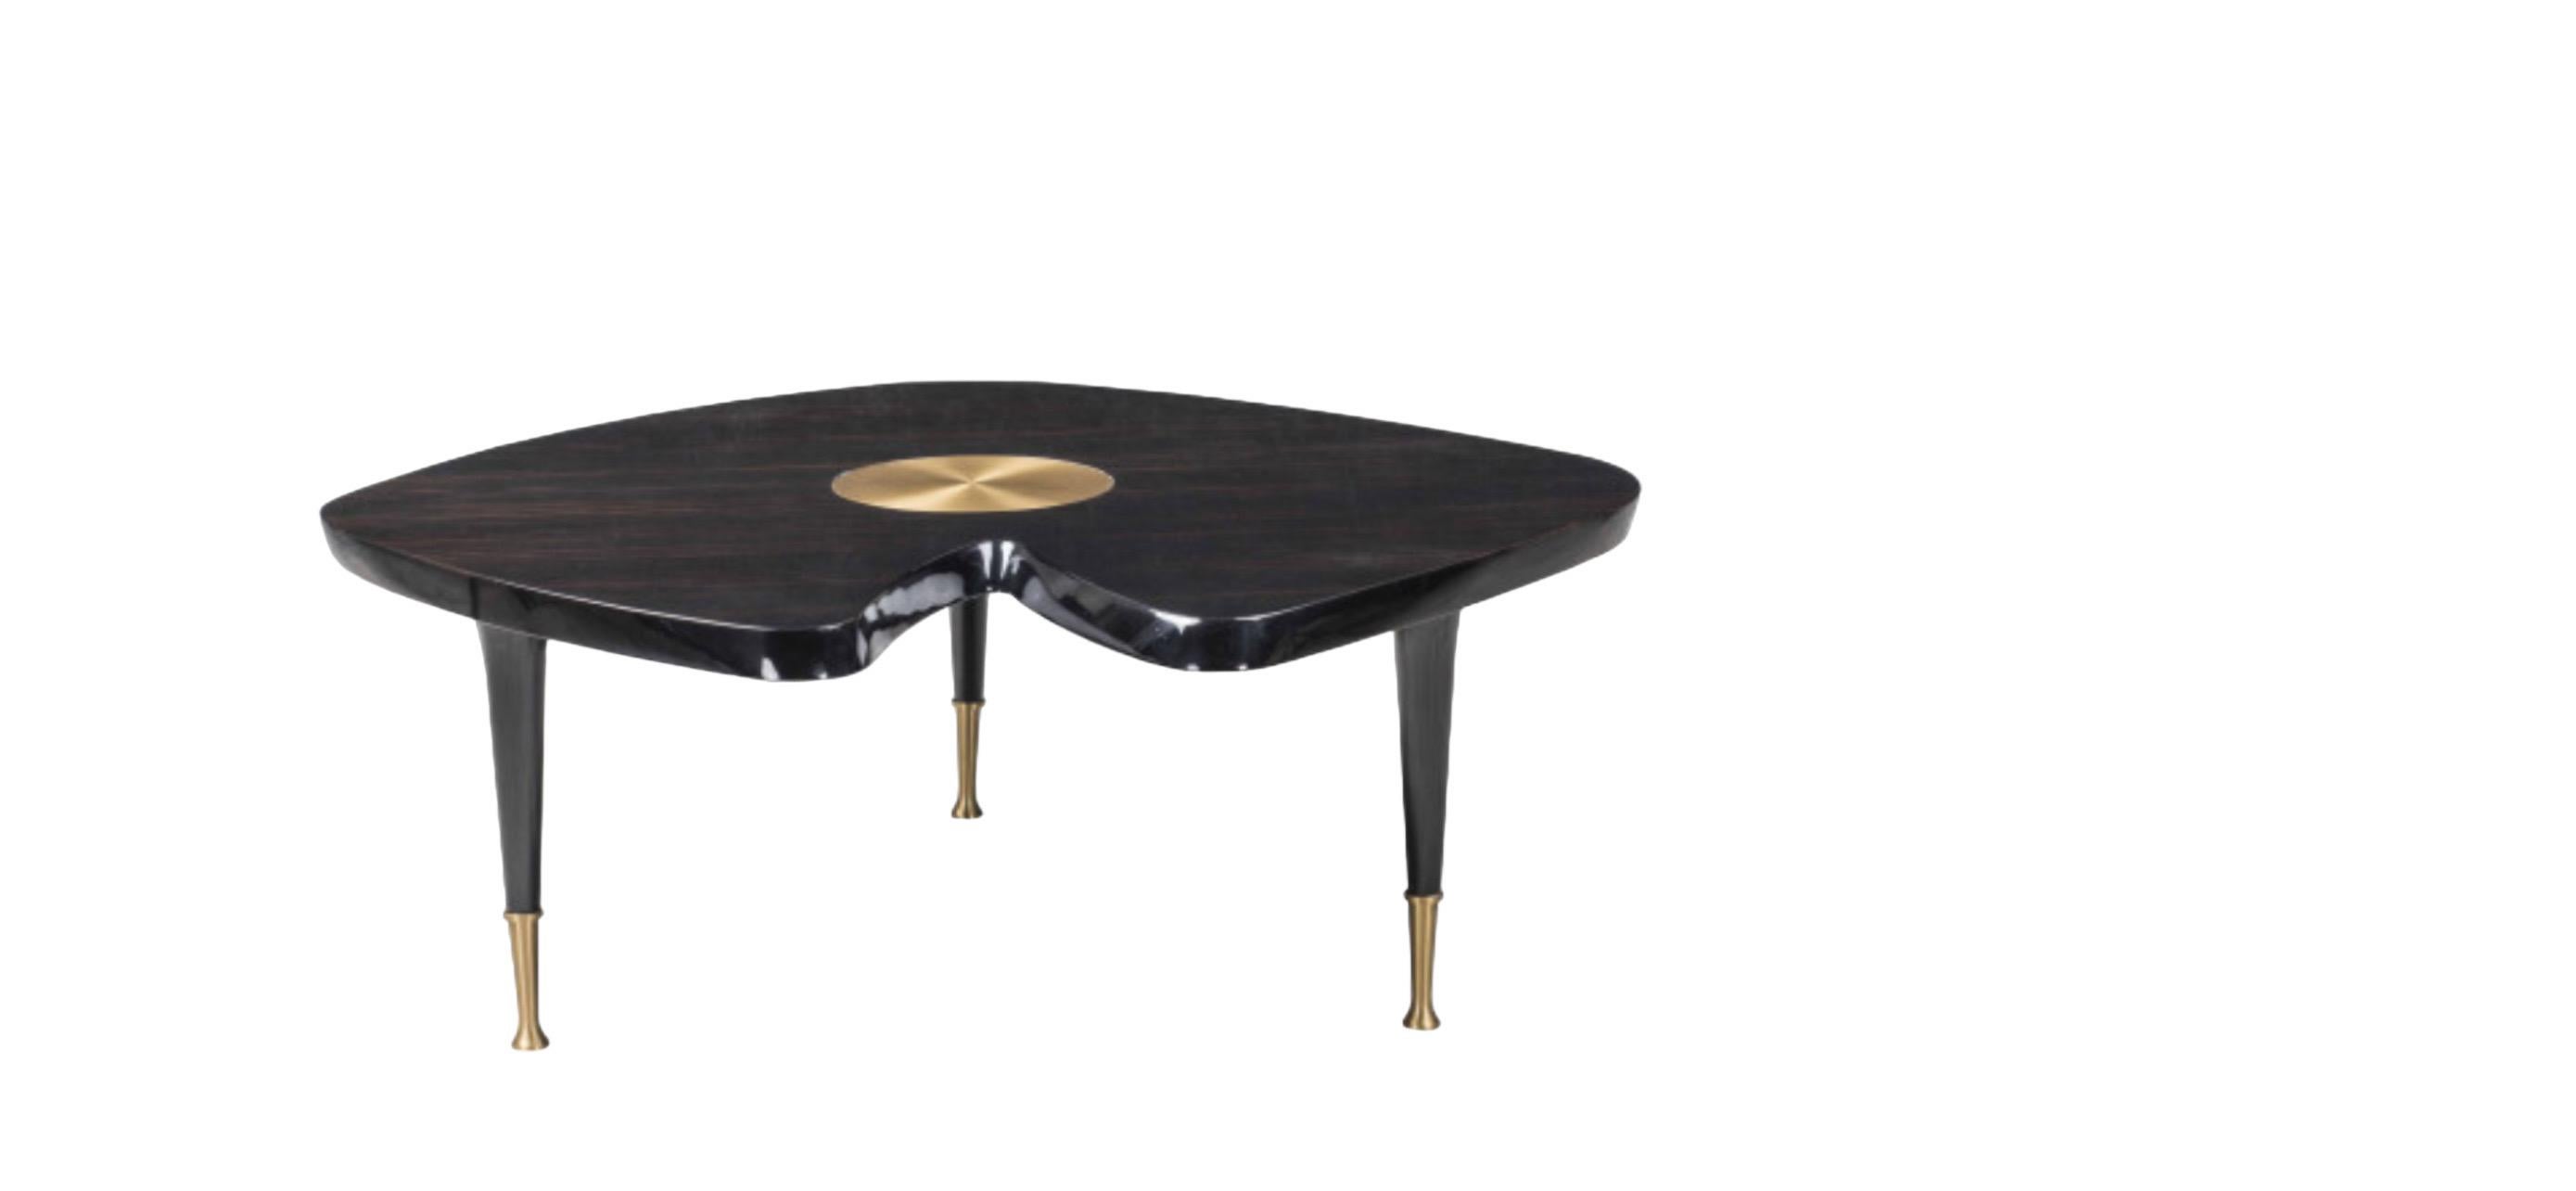 Pair of Fendi Casa Fleurette Coffee Nesting Tables, 
Bronze finish, Lacquer,
by Thierry Lemaire, each marked Fendi, Lacquered.
Metallic brass details fit inside the top in new Palissandro Dark as well as inside the tips of the conical legs, giving